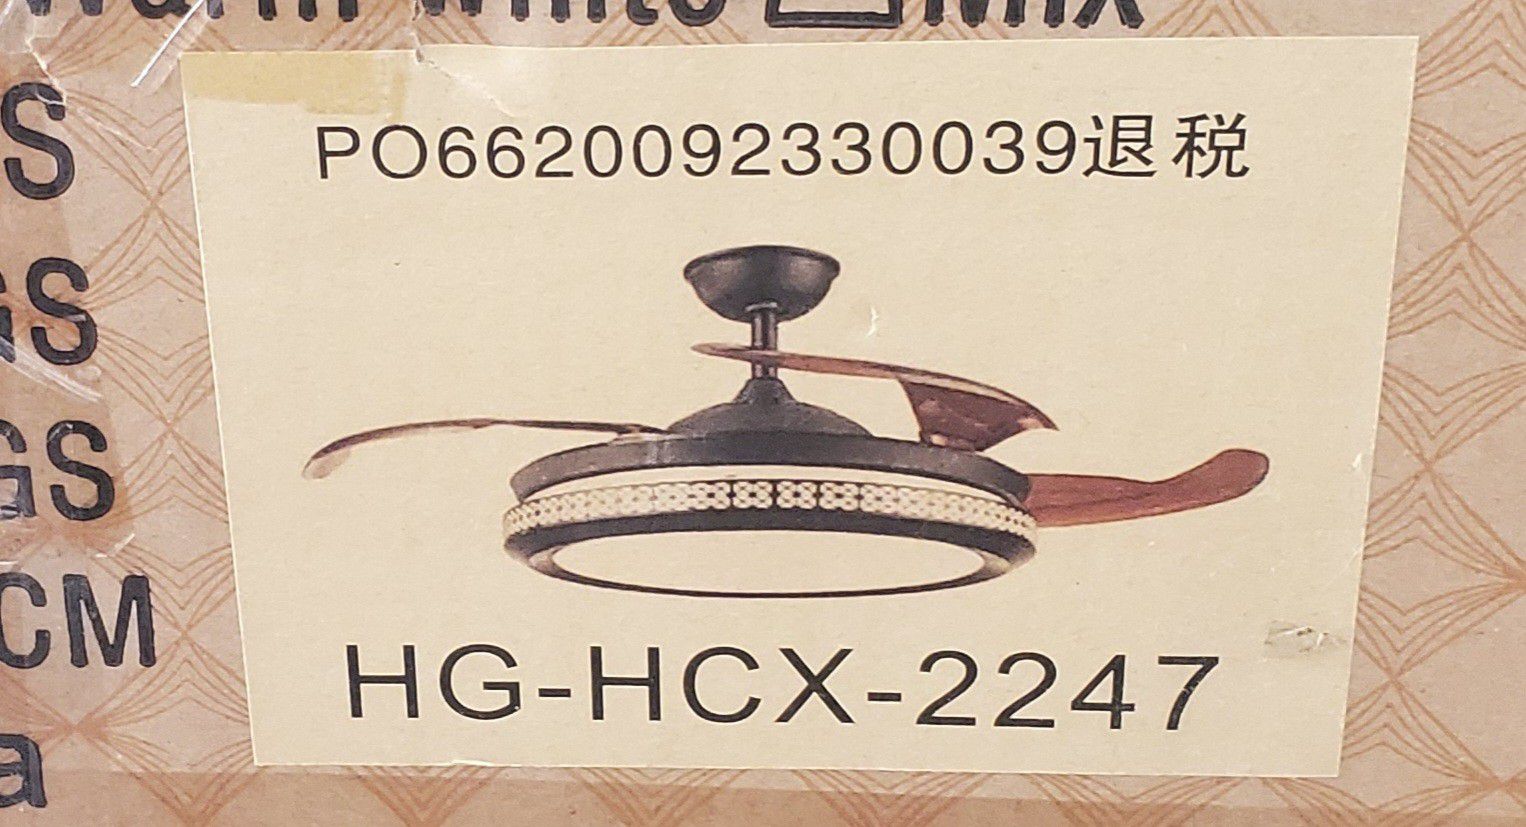 $70 Brand New 42" Round Ceiling Fan Light Chandelier Lamp Retractable Blades With Remote (See Pics)